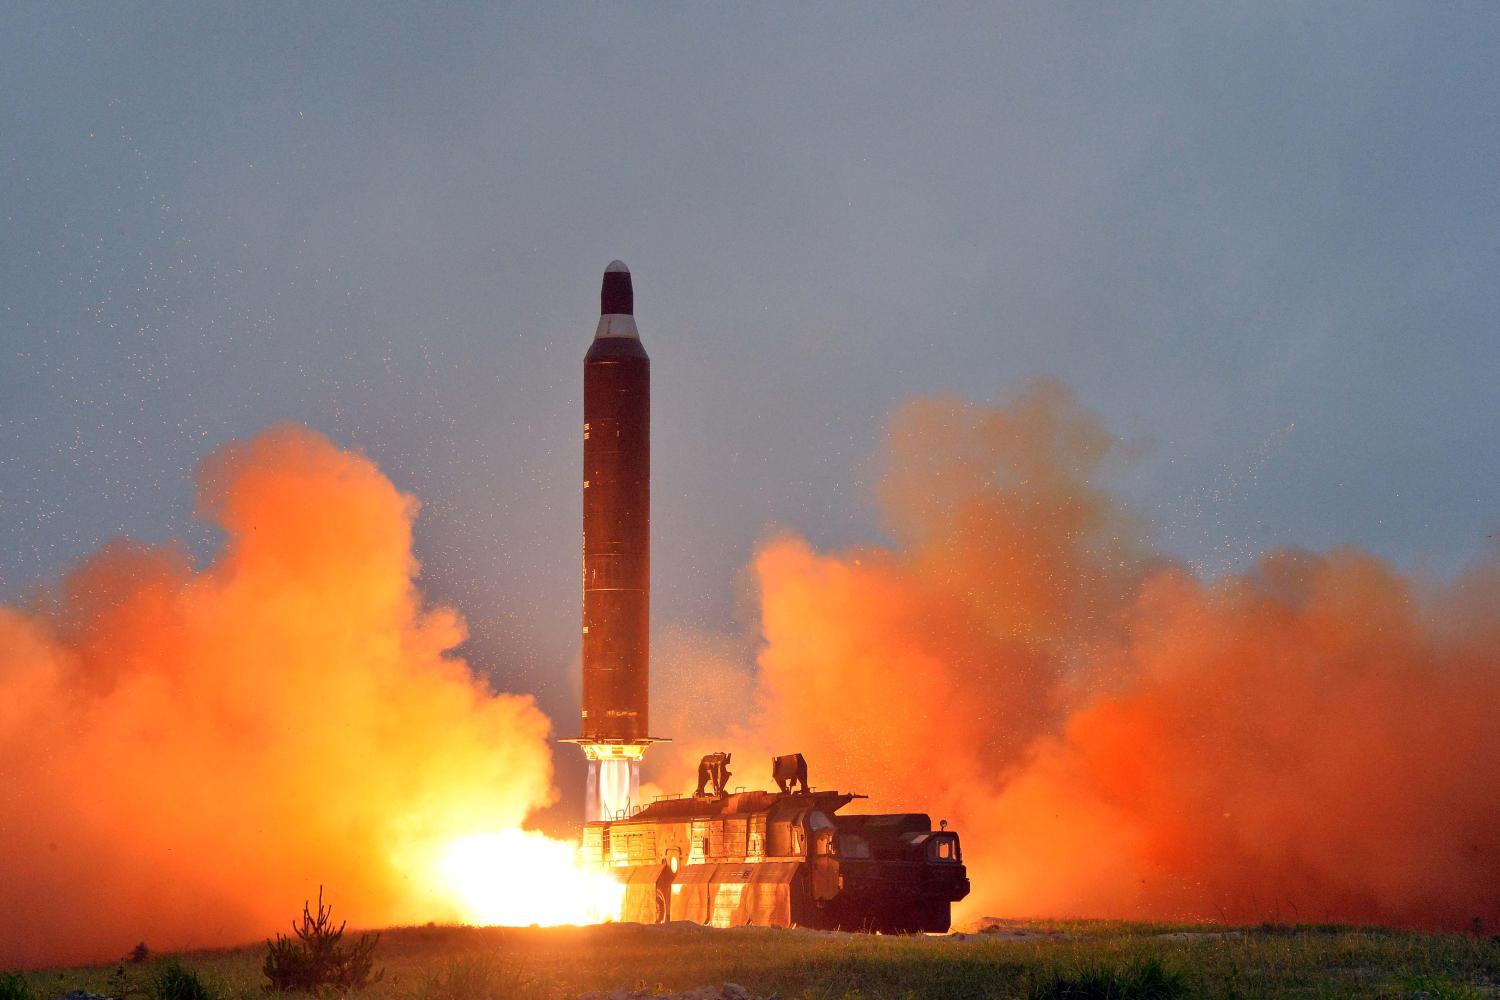 A test launch of ground-to-ground medium long-range ballistic rocket Hwasong-10 in this undated photo released by North Korea's Korean Central News Agency (KCNA) on June 23, 2016. REUTERS/KCNA ATTENTION EDITORS - THIS PICTURE WAS PROVIDED BY A THIRD PARTY. REUTERS IS UNABLE TO INDEPENDENTLY VERIFY THE AUTHENTICITY, CONTENT, LOCATION OR DATE OF THIS IMAGE. FOR EDITORIAL USE ONLY. NOT FOR SALE FOR MARKETING OR ADVERTISING CAMPAIGNS. NO THIRD PARTY SALES. NOT FOR USE BY REUTERS THIRD PARTY DISTRIBUTORS. SOUTH KOREA OUT. NO COMMERCIAL OR EDITORIAL SALES IN SOUTH KOREA. THIS PICTURE IS DISTRIBUTED EXACTLY AS RECEIVED BY REUTERS, AS A SERVICE TO CLIENTS. TPX IMAGES OF THE DAY - RTX2HQYT